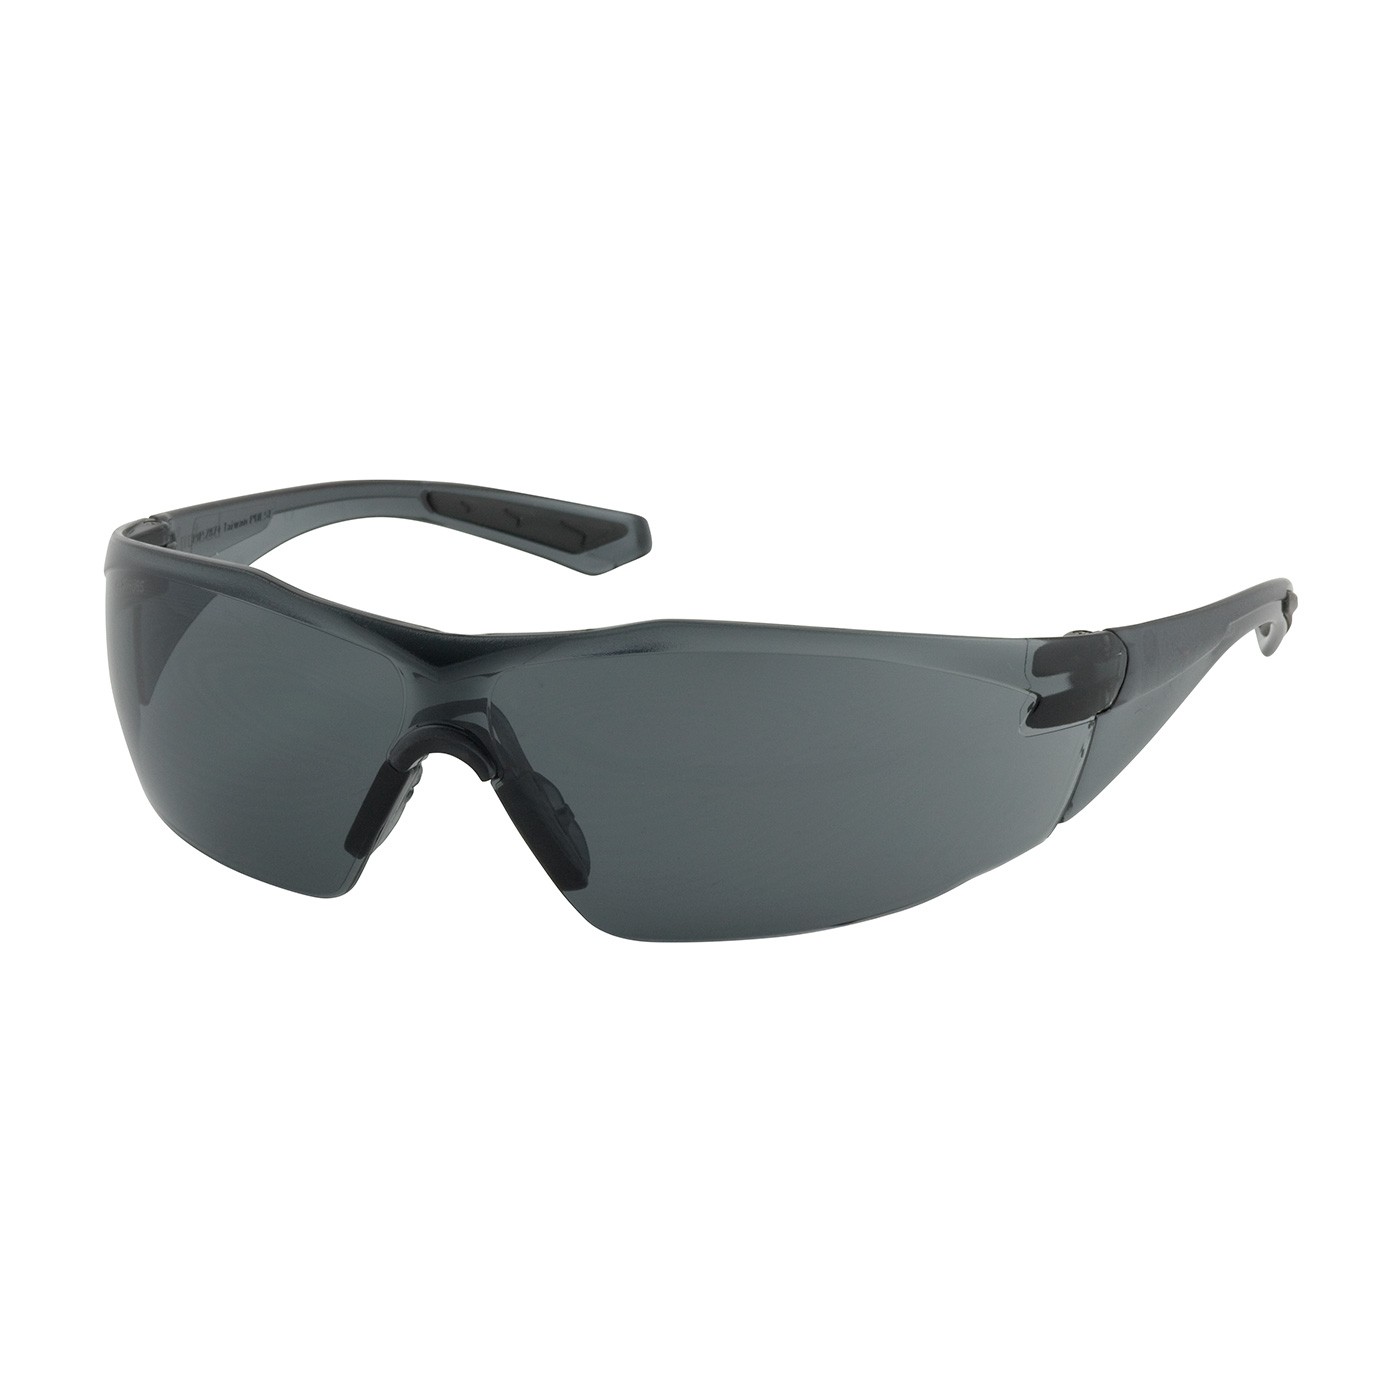 Pulse™ Rimless Safety Glasses with Gray Temple, Gray Lens and Anti-Scratch / Anti-Fog Coating  (#250-49-0021)